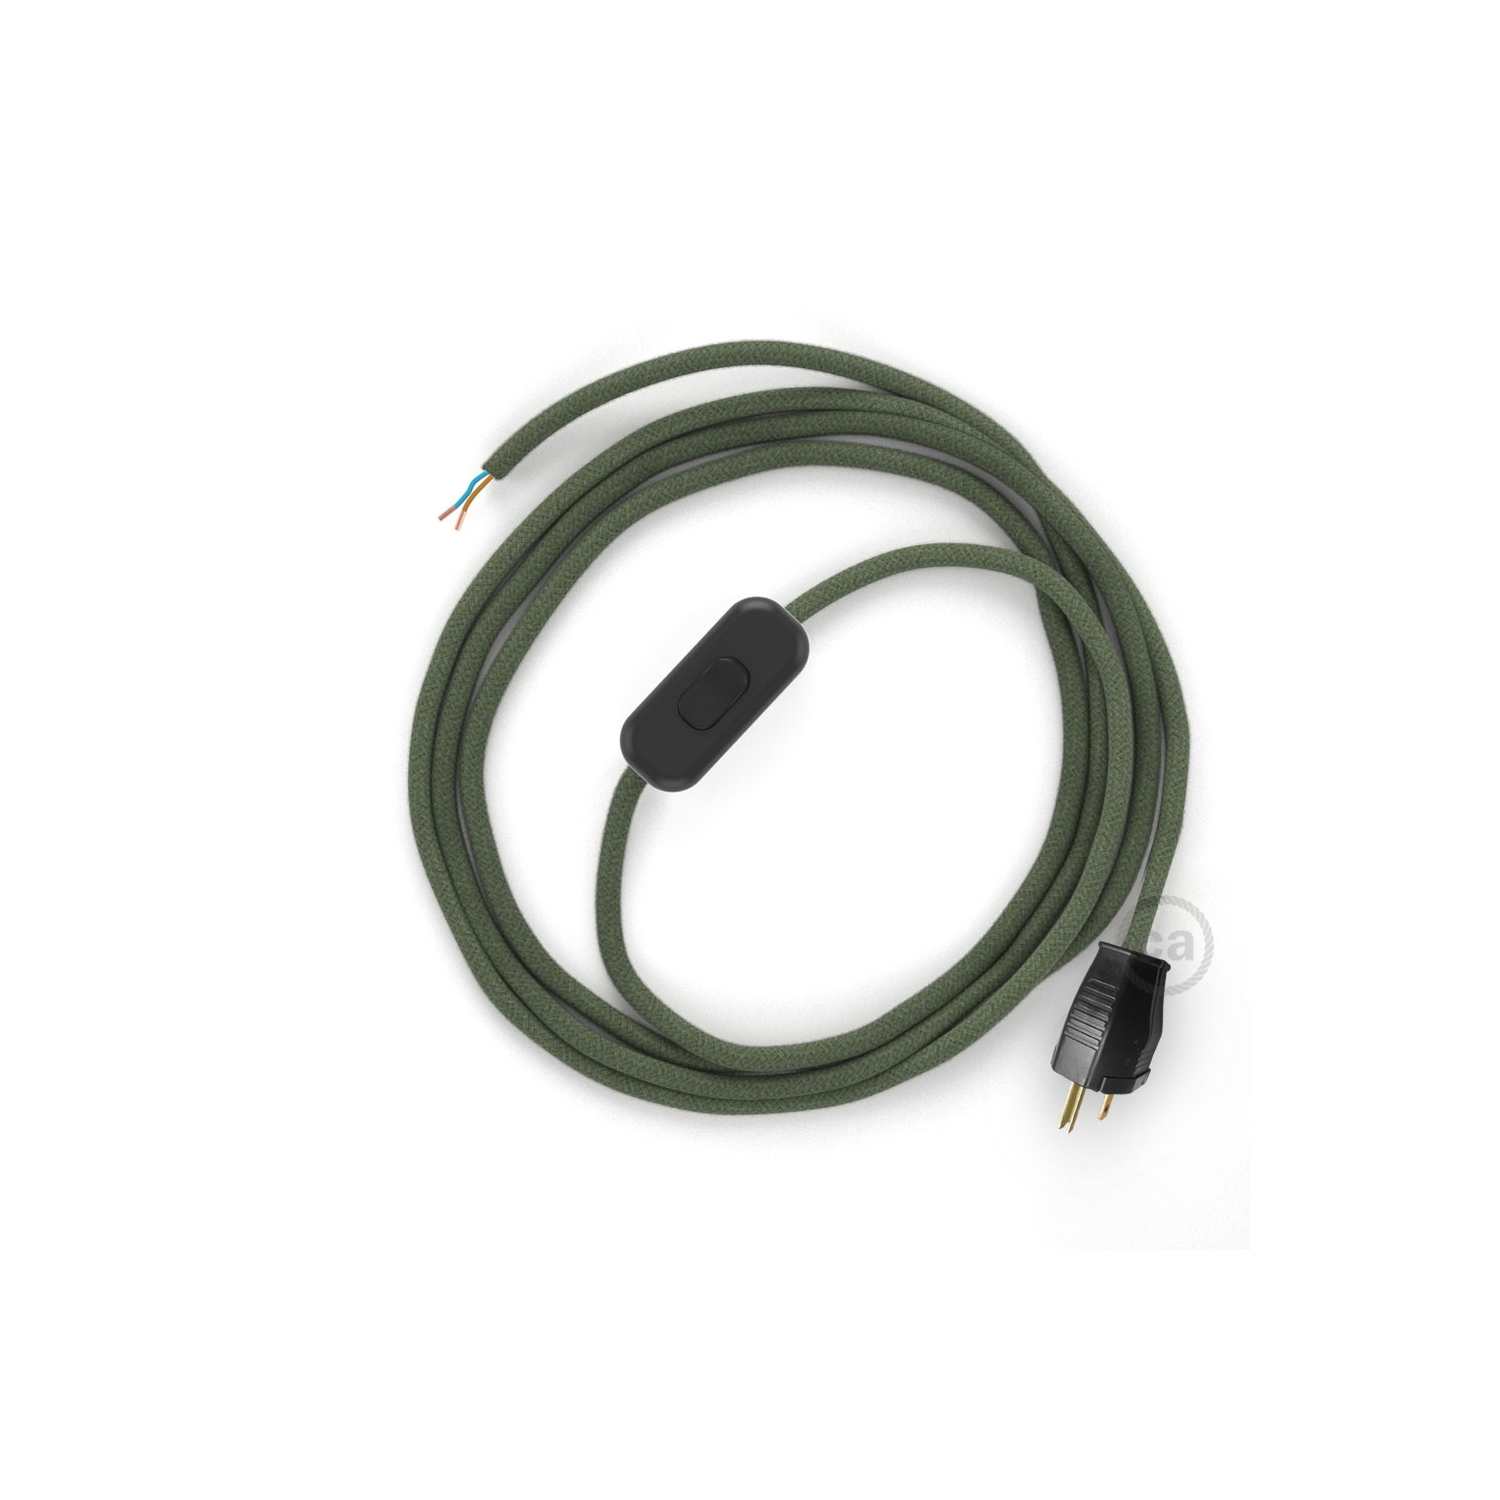 Power Cord with in-line switch, RC63 Gray Green Cotton - Choose color of switch/plug